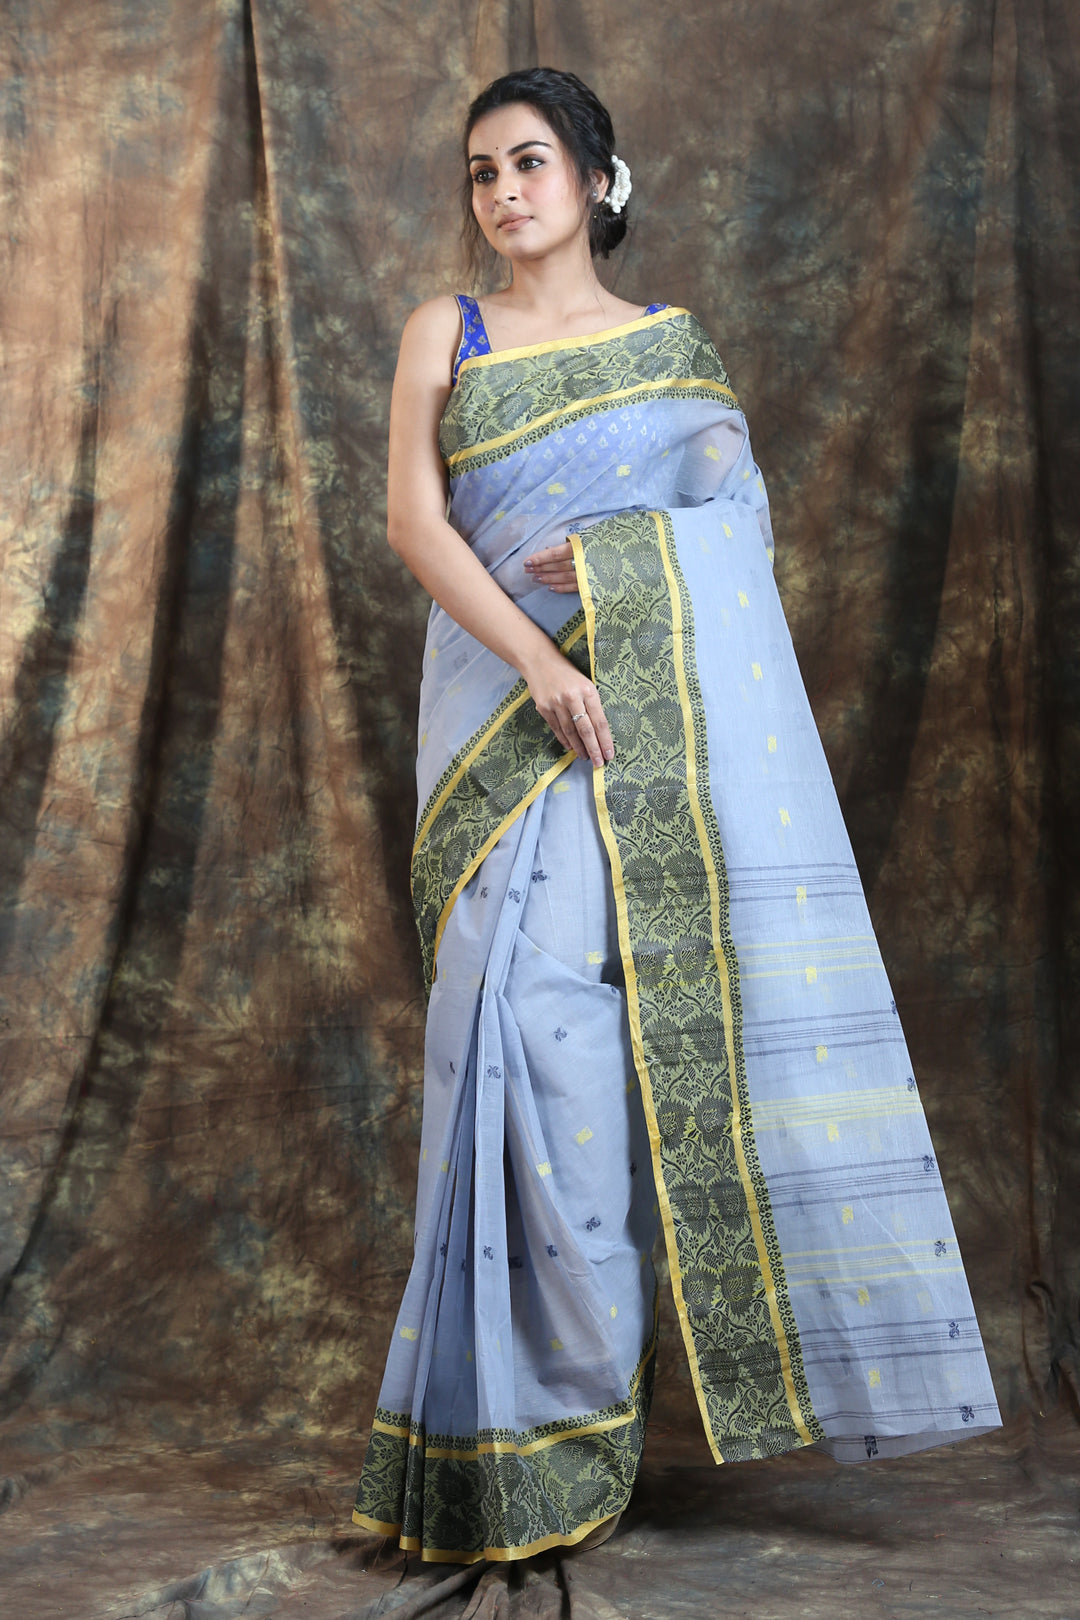 Steel Greay Handwoven Cotton Tant Saree